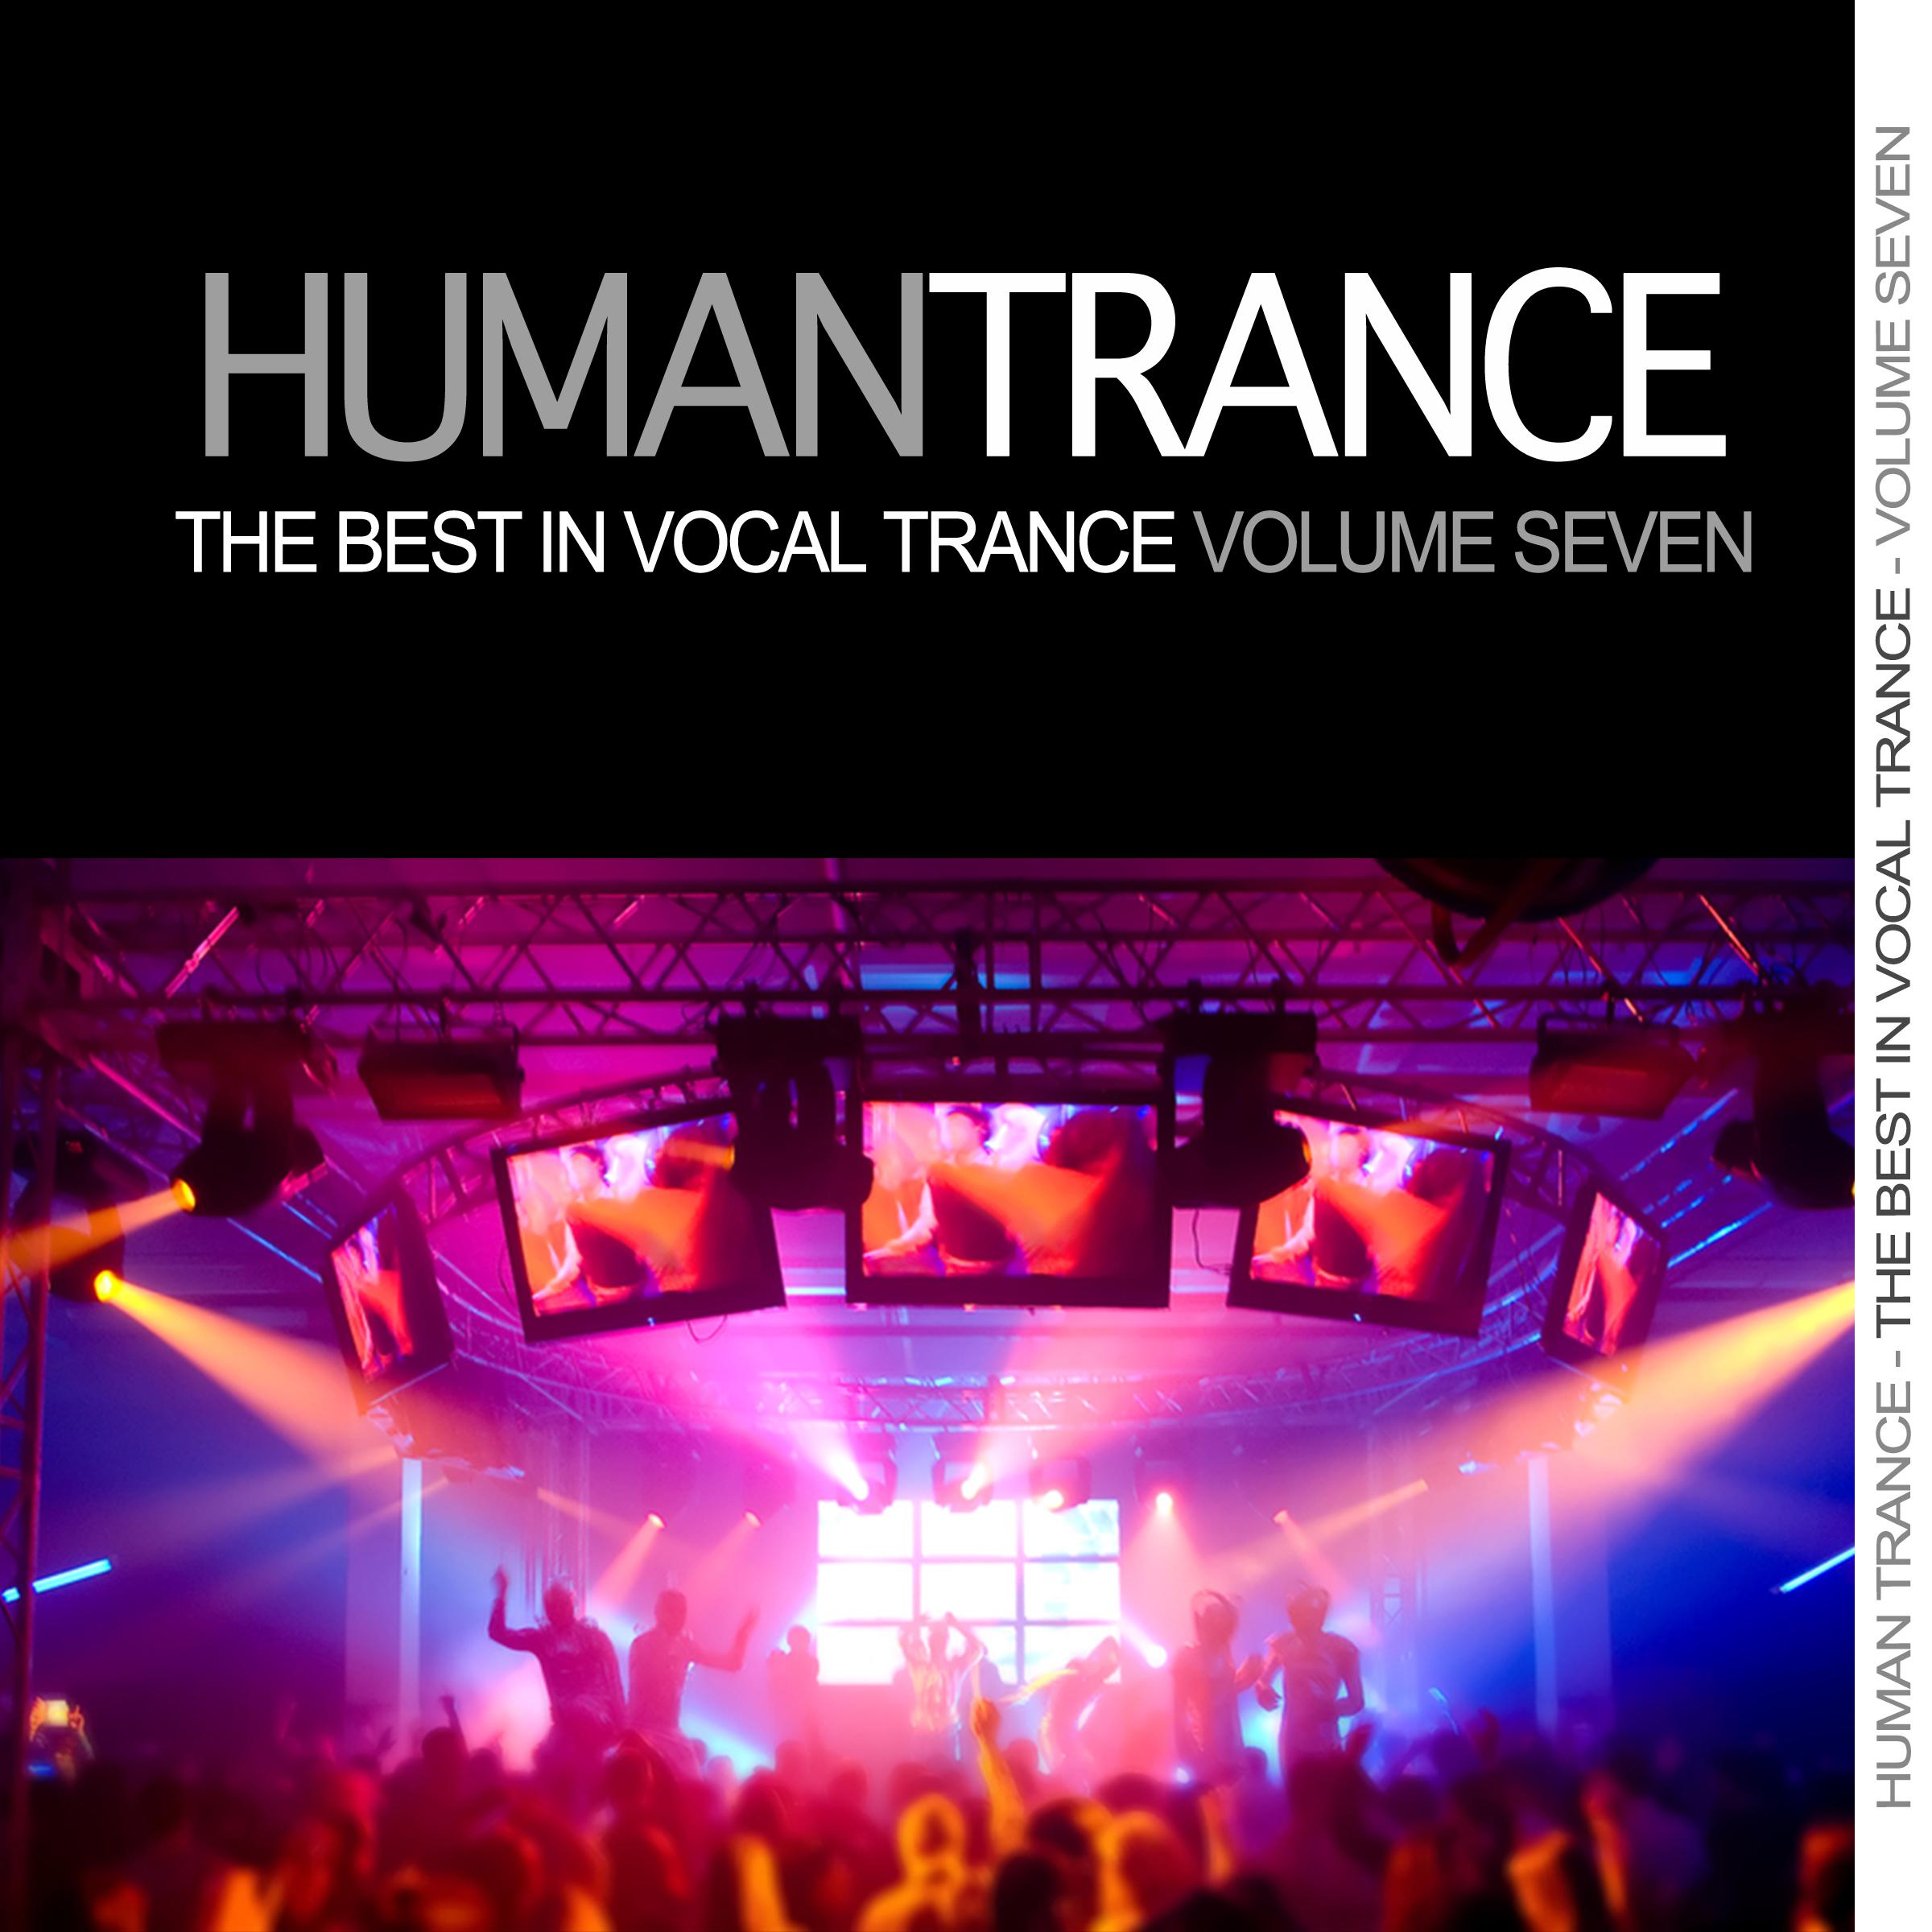 Human Trance, Vol. 7 - Best in Vocal Trance!